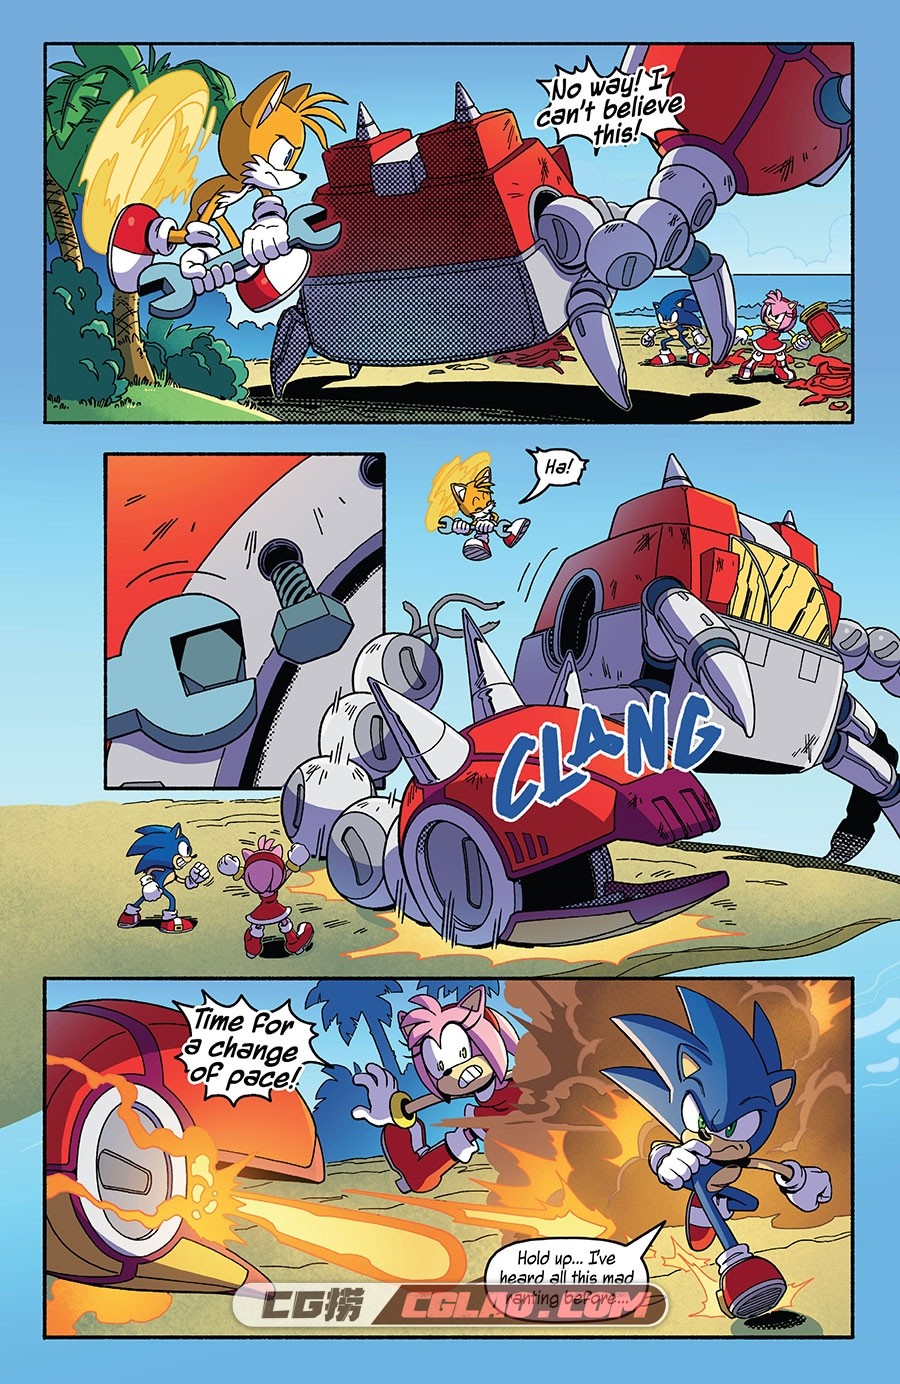 Sonic Frontiers Prologue Convergence 漫画 百度网盘下载,Sonic-Frontiers-Prologue---Convergence-004.jpg